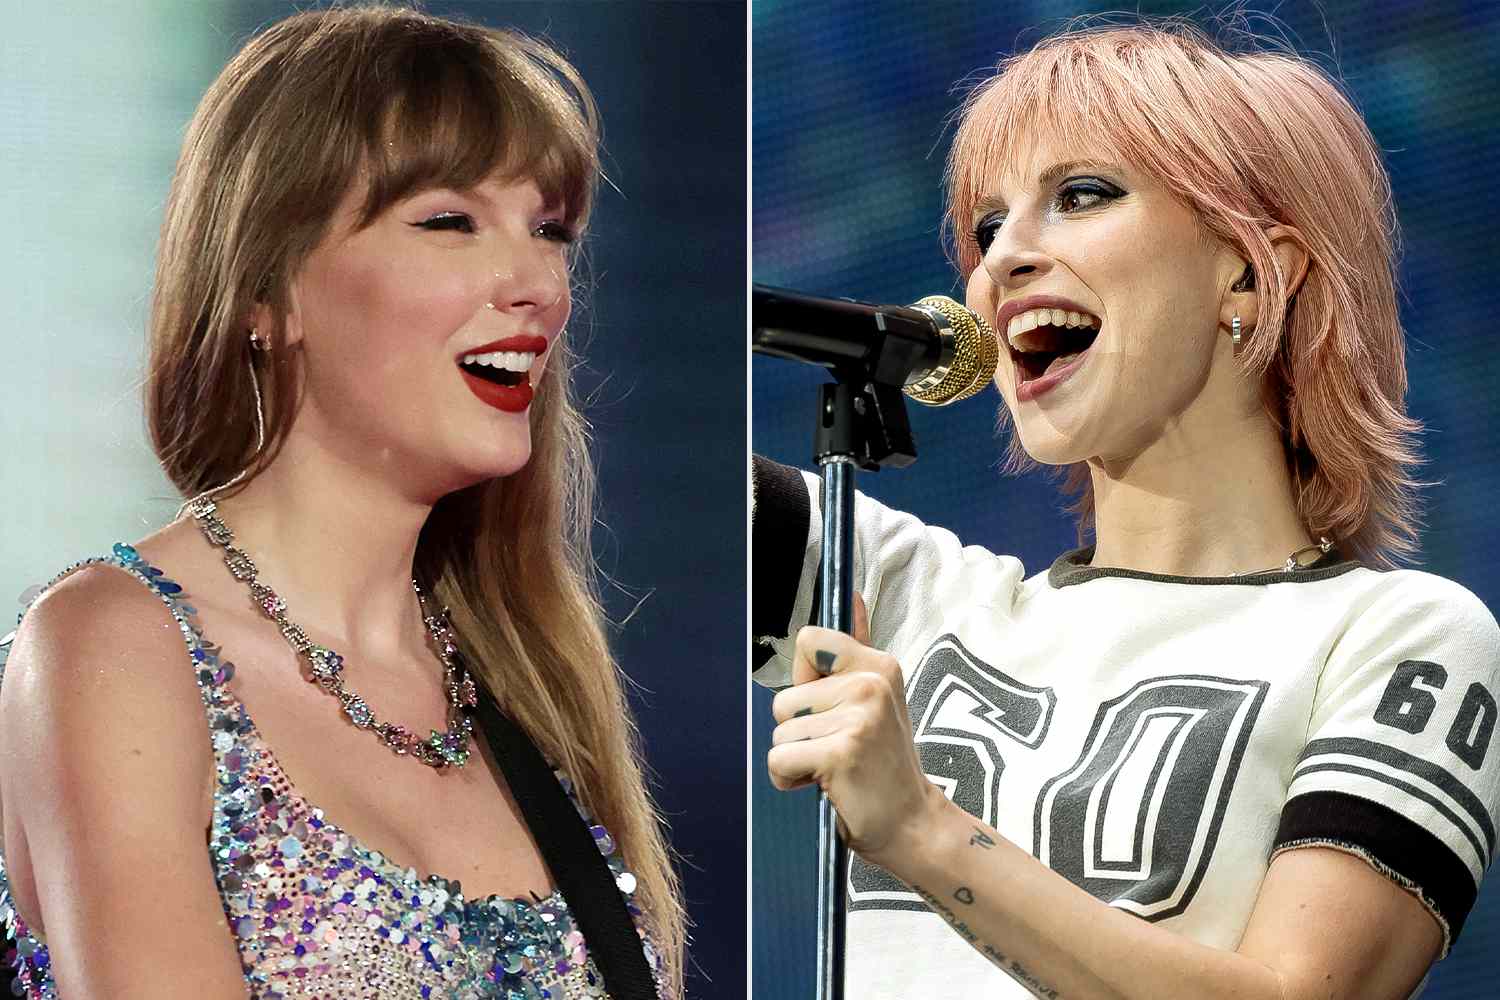 Taylor Swift Brings Out Paramore’s Hayley Williams for Surprise Duet at 2nd Eras Tour Show in London